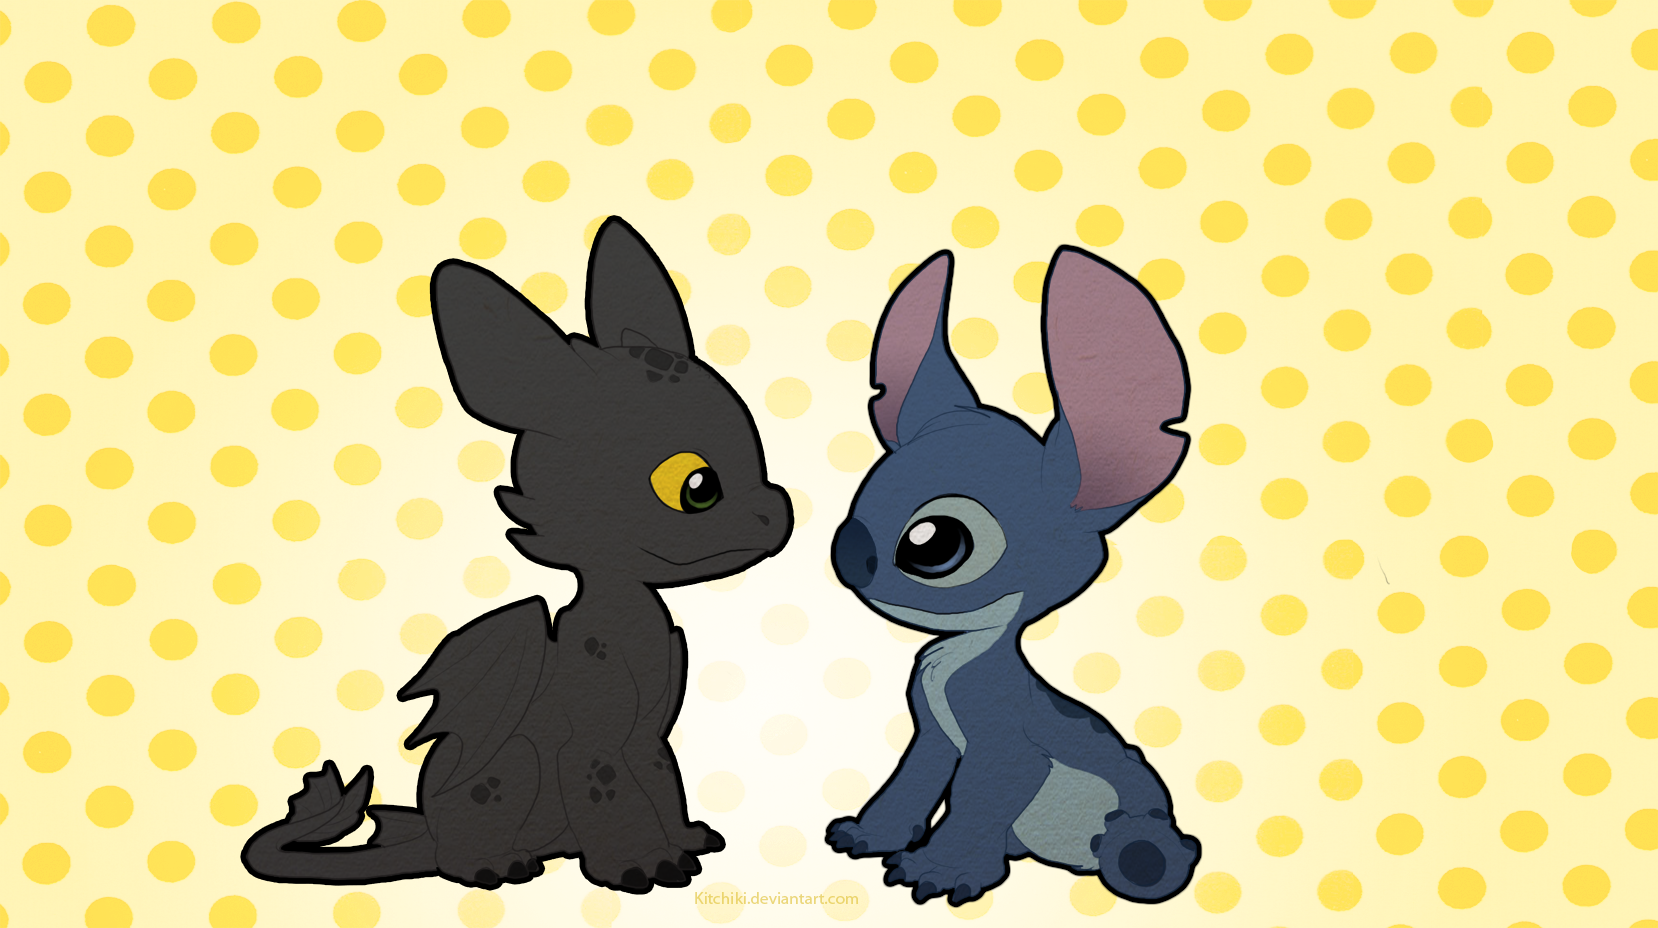 Stitch and Toothless by Kitchiki on DeviantArt